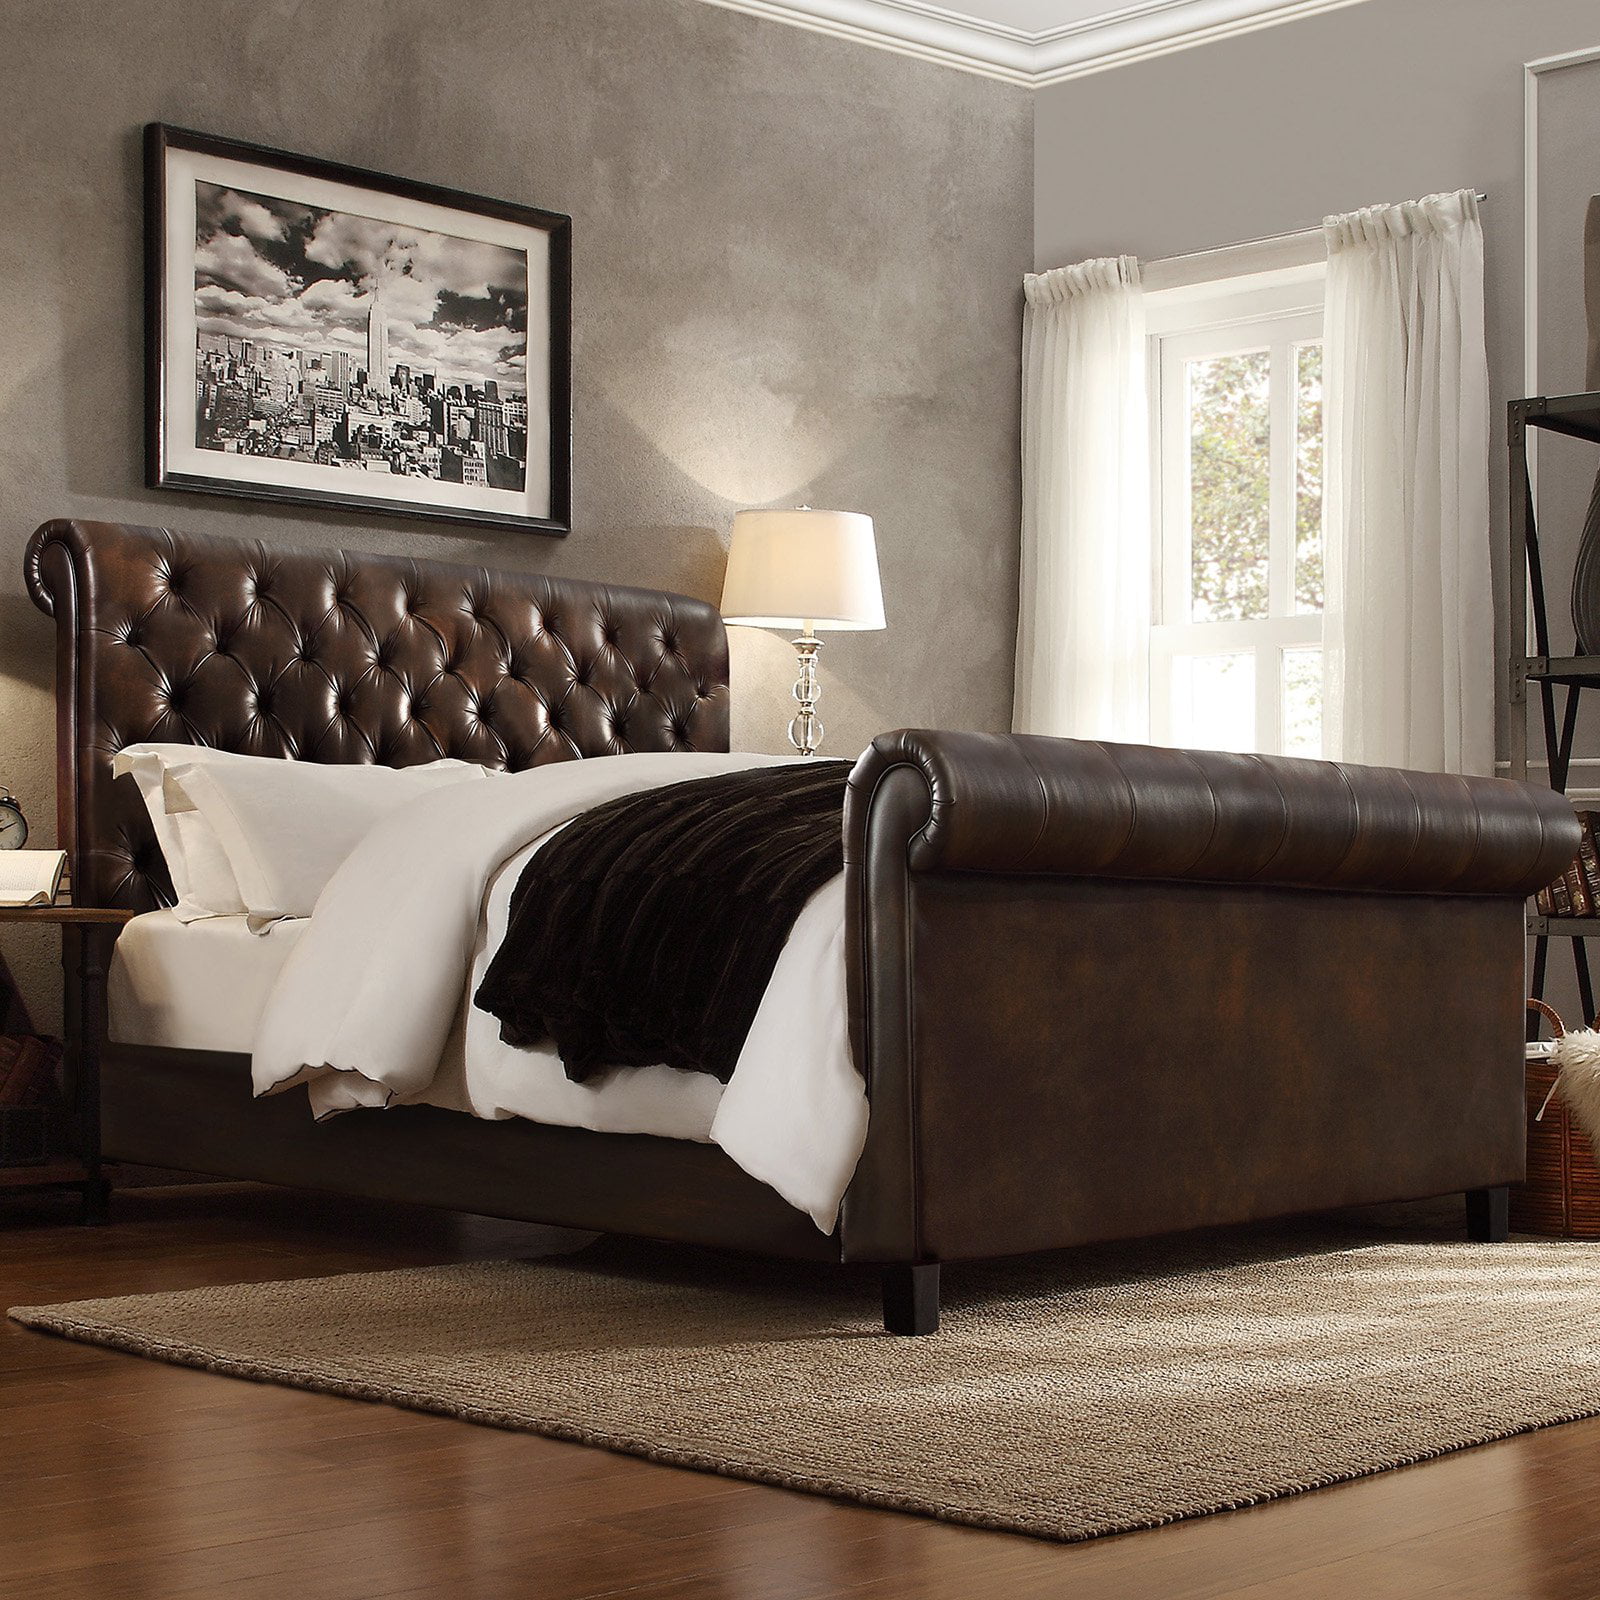 Weston Home Dartford Upholstered Faux, Leather Sleigh Bed Double